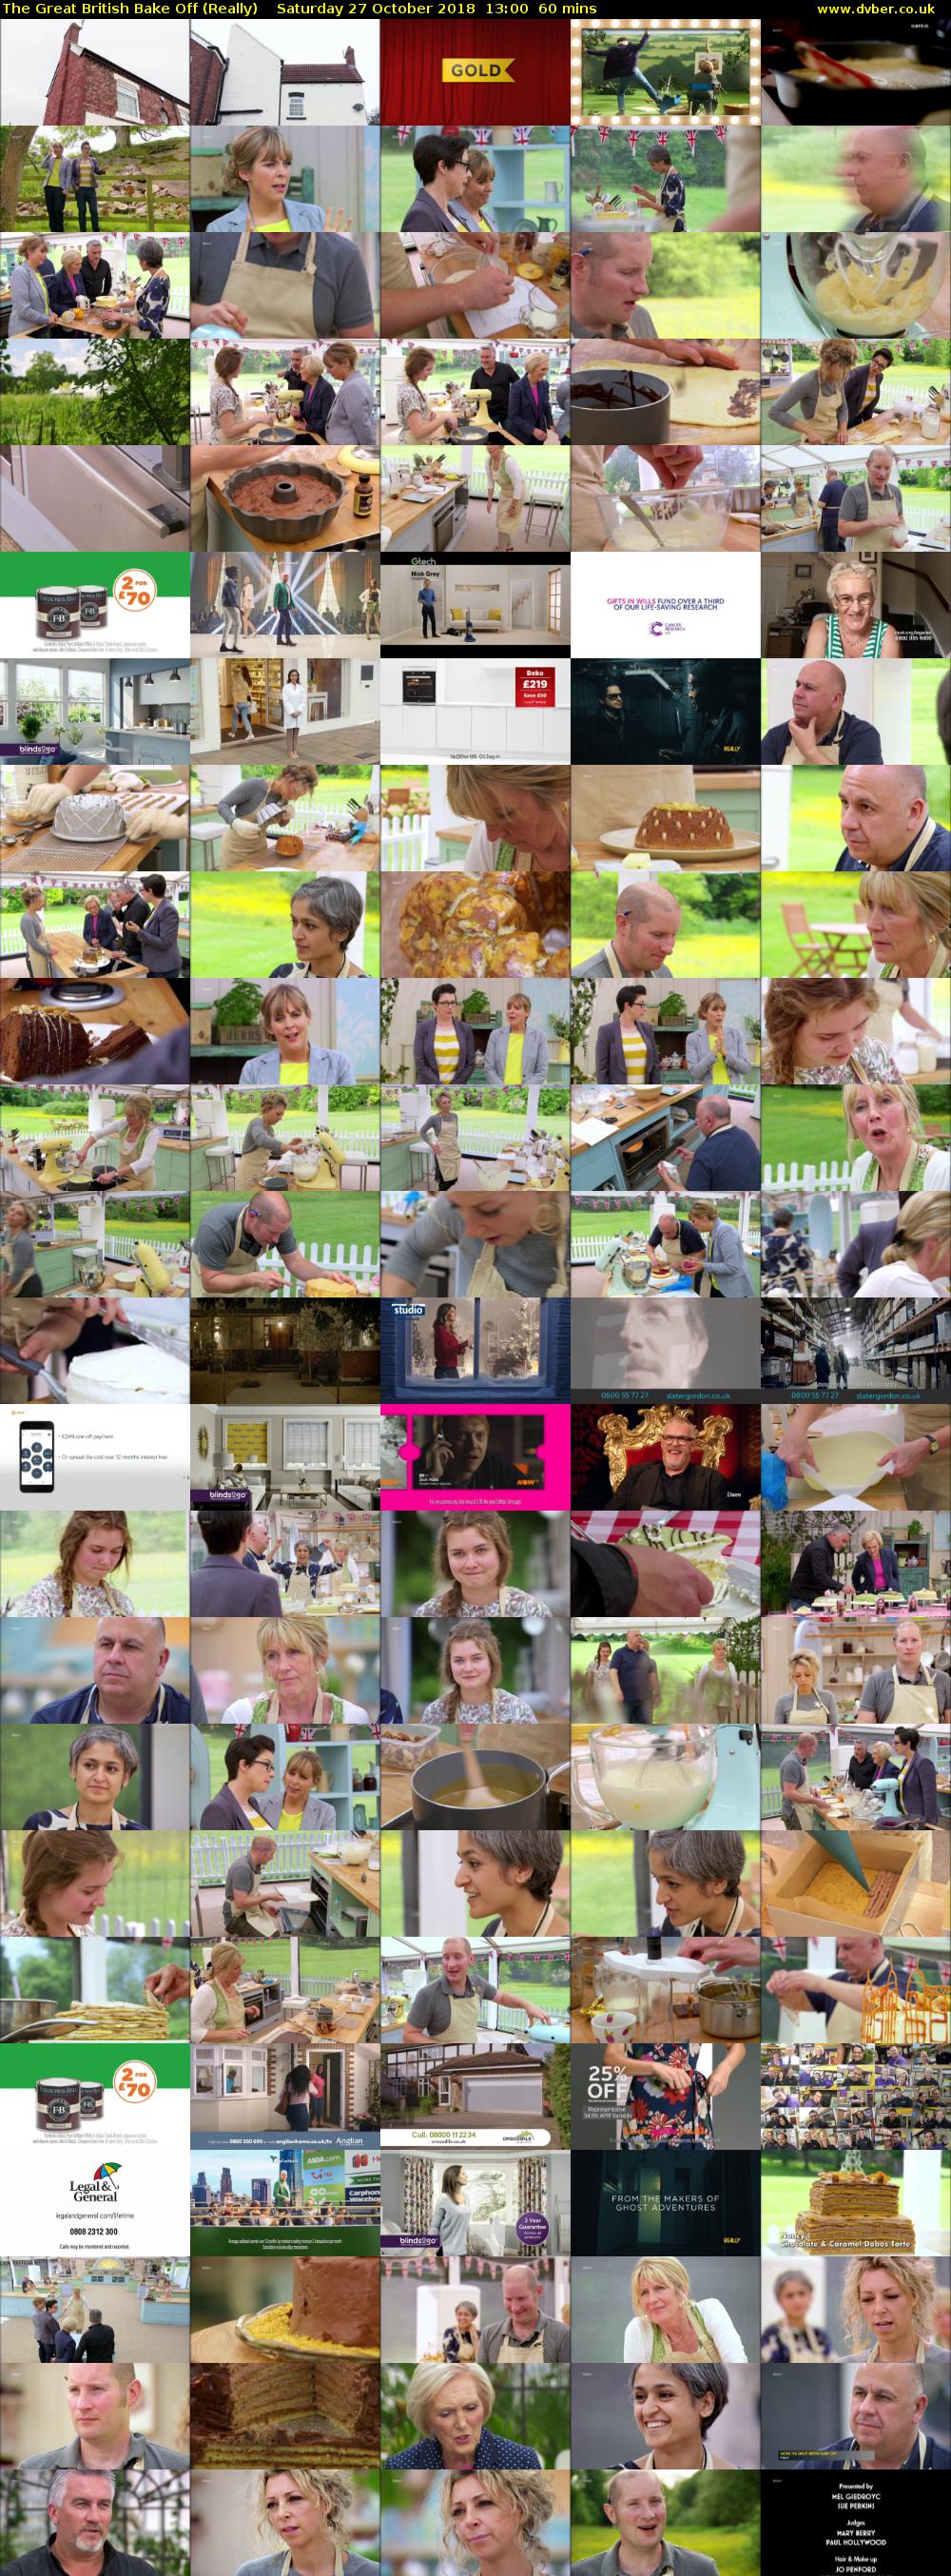 The Great British Bake Off (Really) Saturday 27 October 2018 13:00 - 14:00